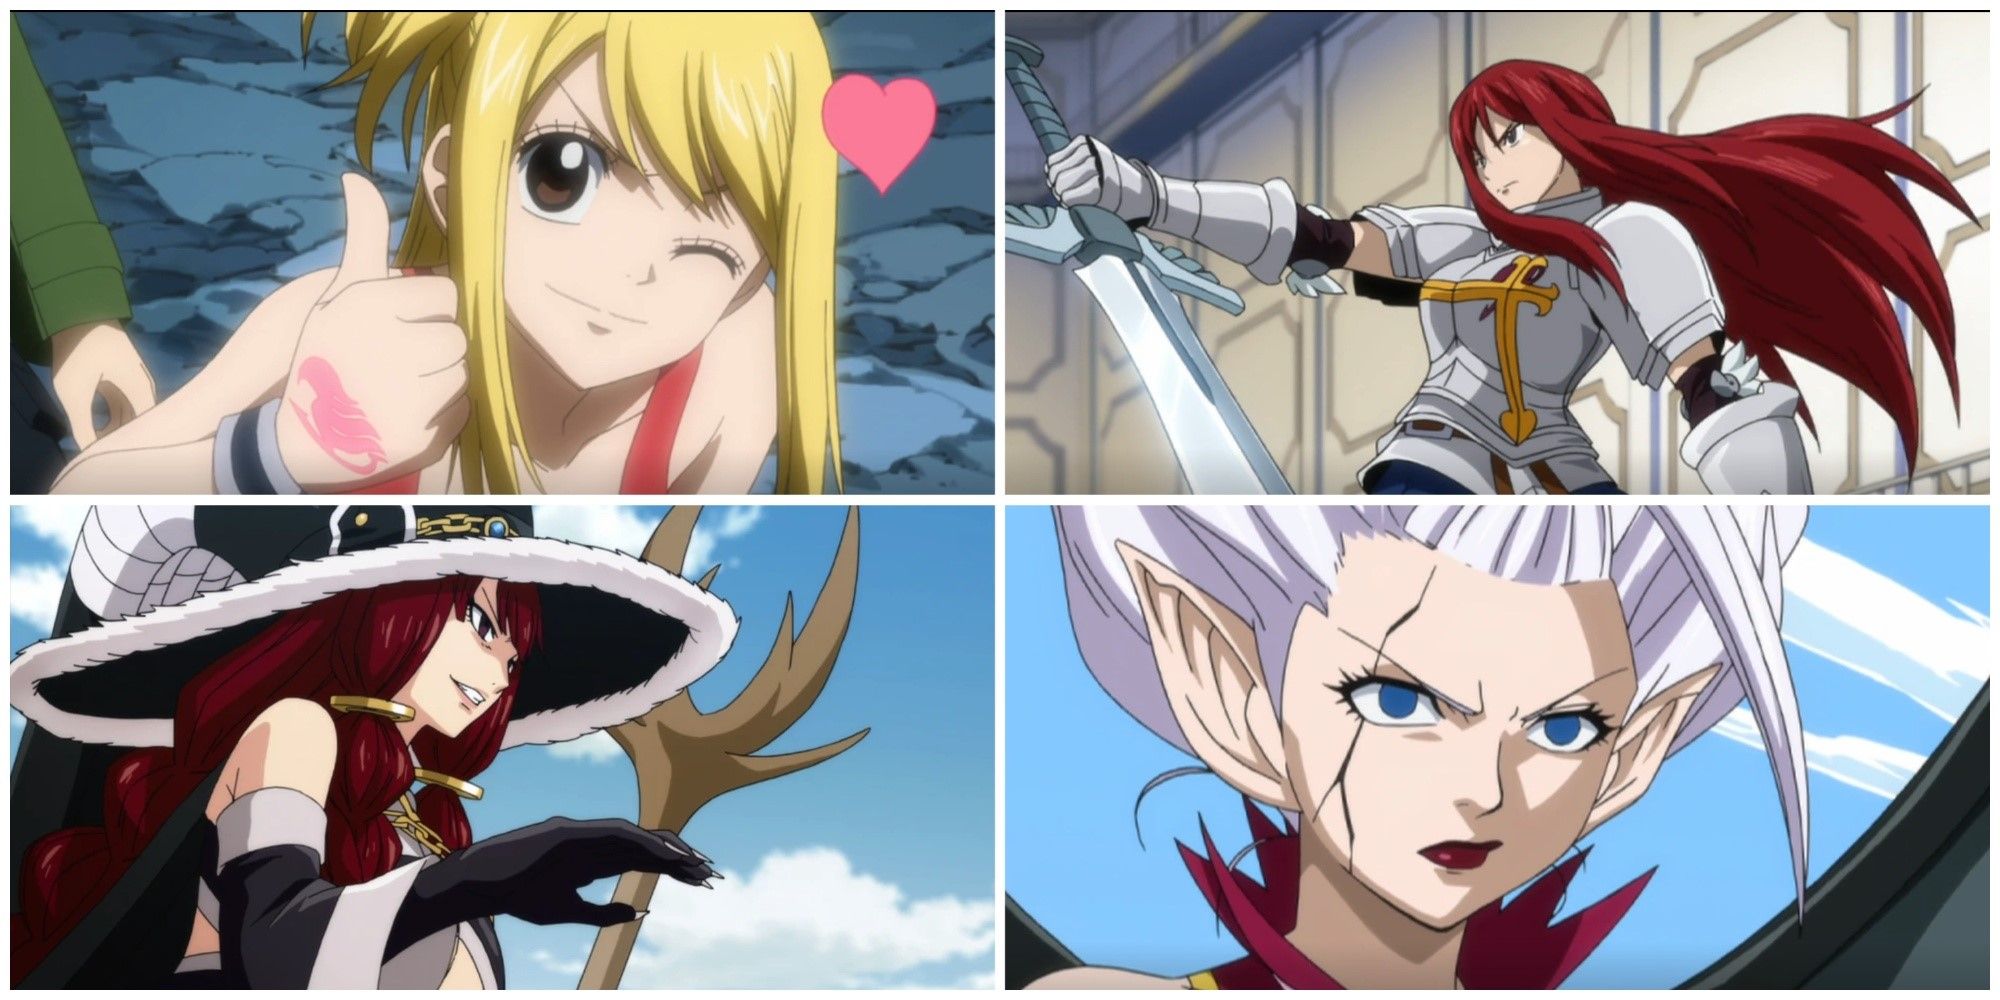 Top 10 Strongest Fairy Tail Characters of All Time  Fairy tail, Fairy  tail characters, Fairy tail anime